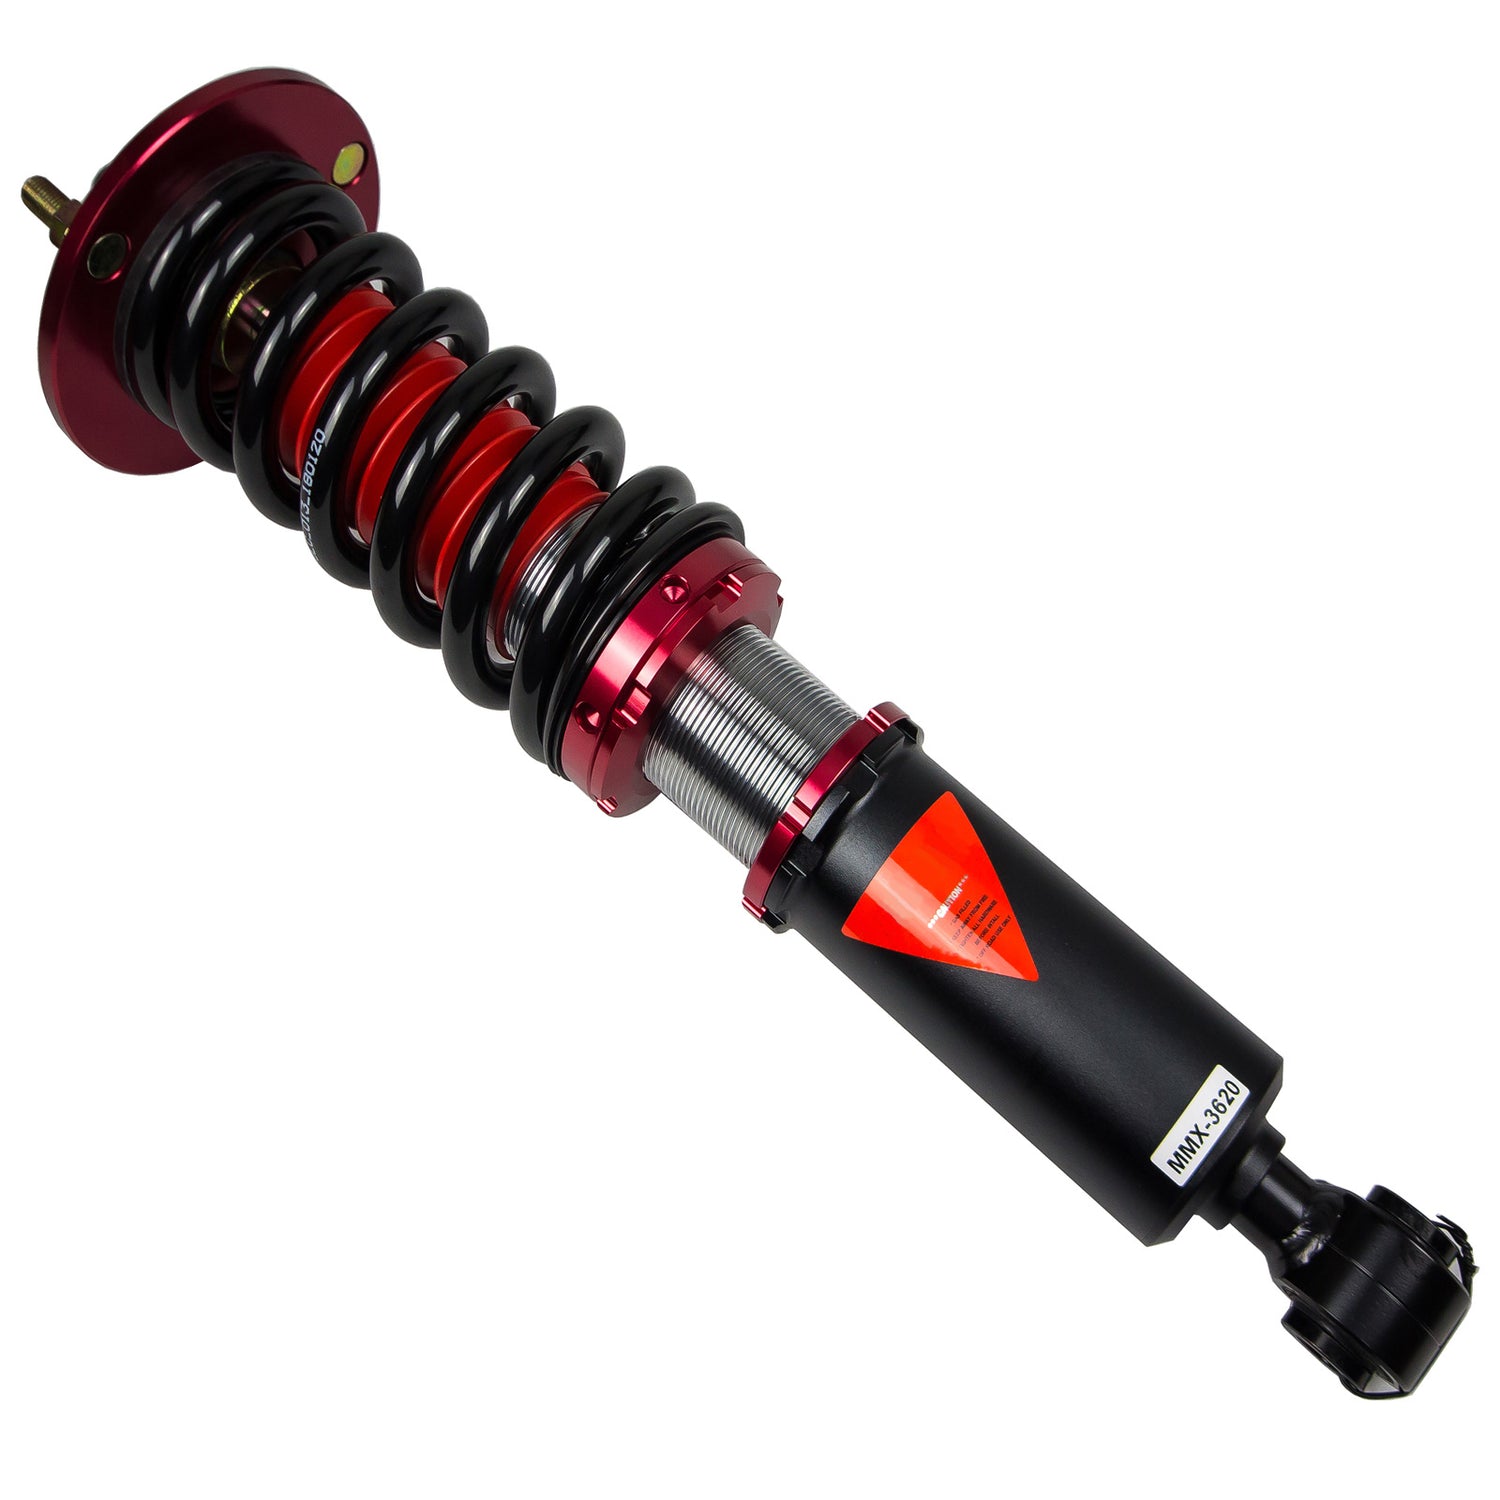 MMX3620 MAXX Coilovers Lowering Kit, Fully Adjustable, Ride Height, 40 Clicks Rebound Settings, Lexus IS200T/IS250/IS300/IS350(XE30) RWD 2014-18